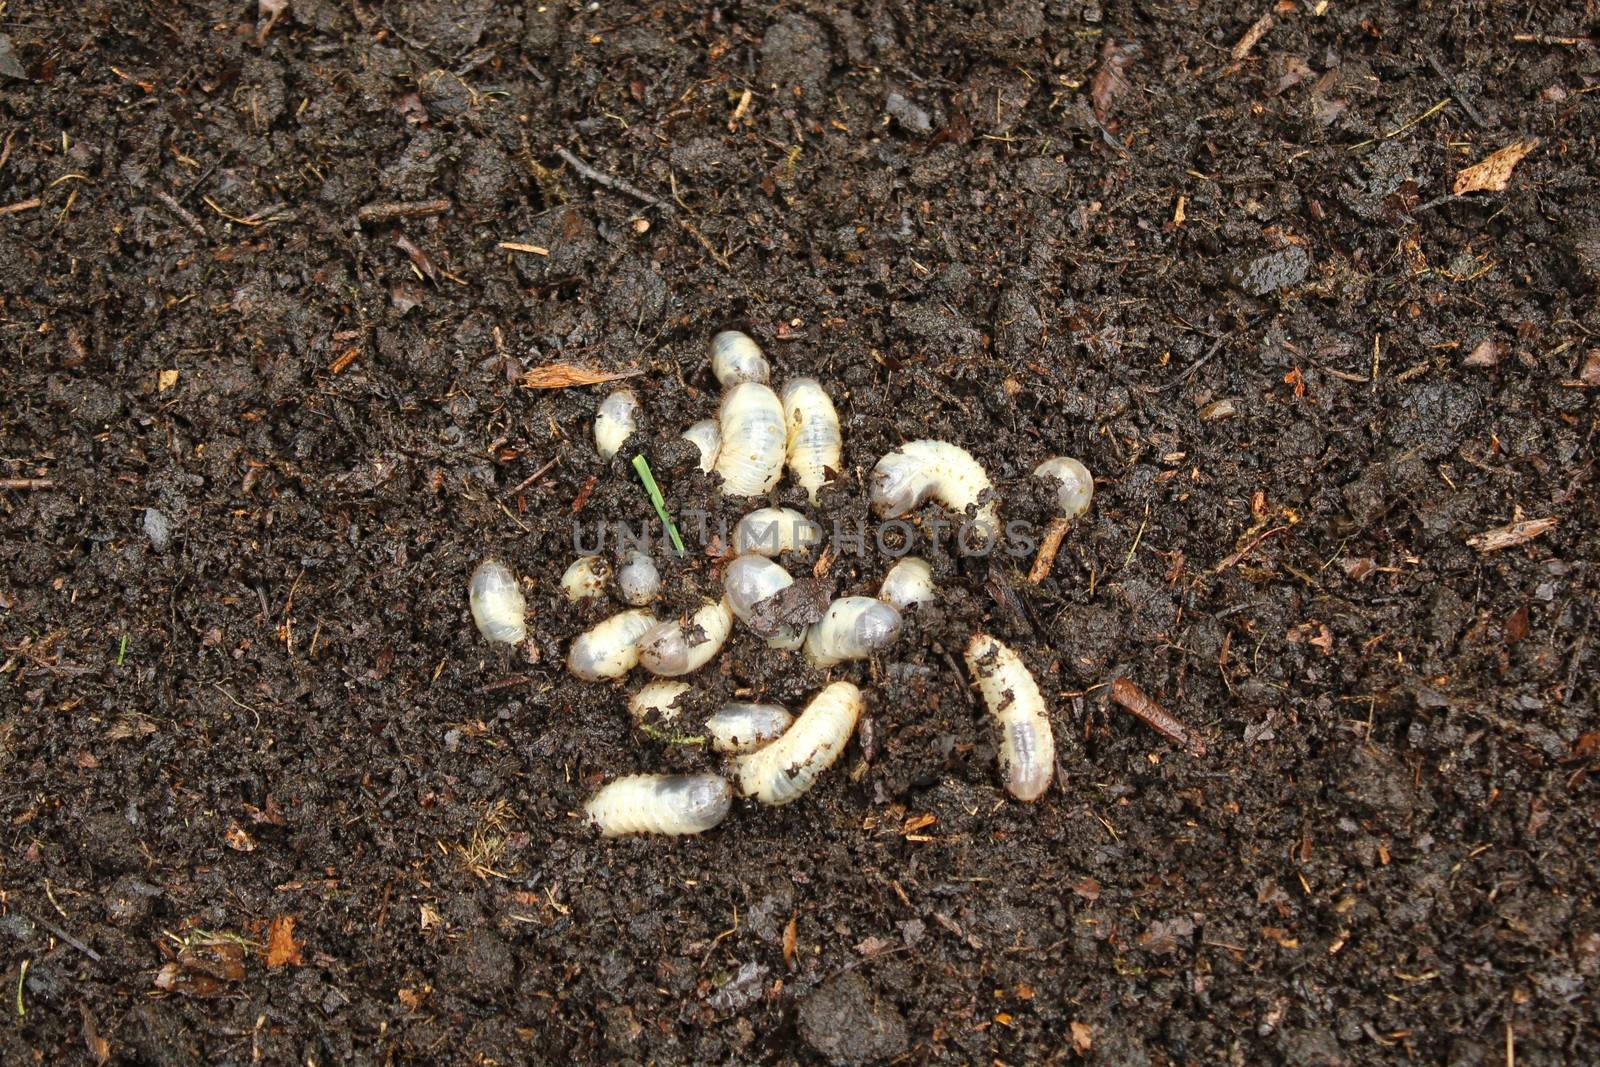 The pictureshows a rose chafer larvae in the compost pile.